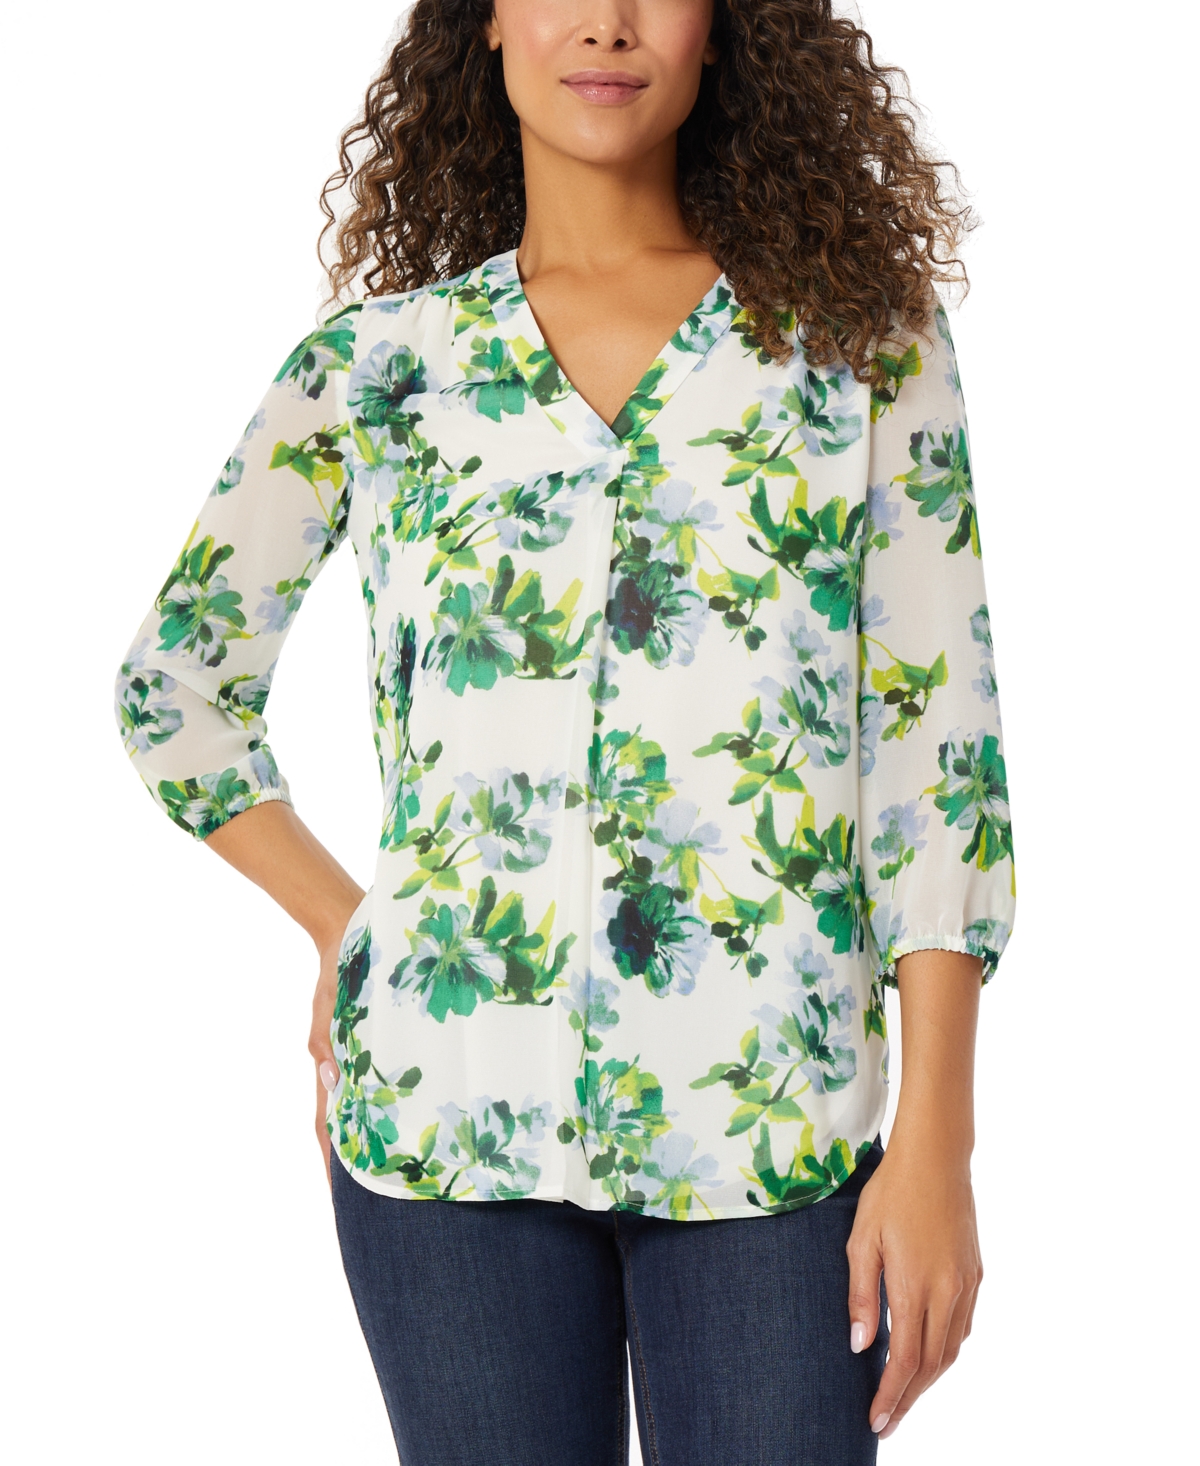 Women's Floral-Print 3/4-Sleeve Tunic Top - NYC White/Kelly Multi